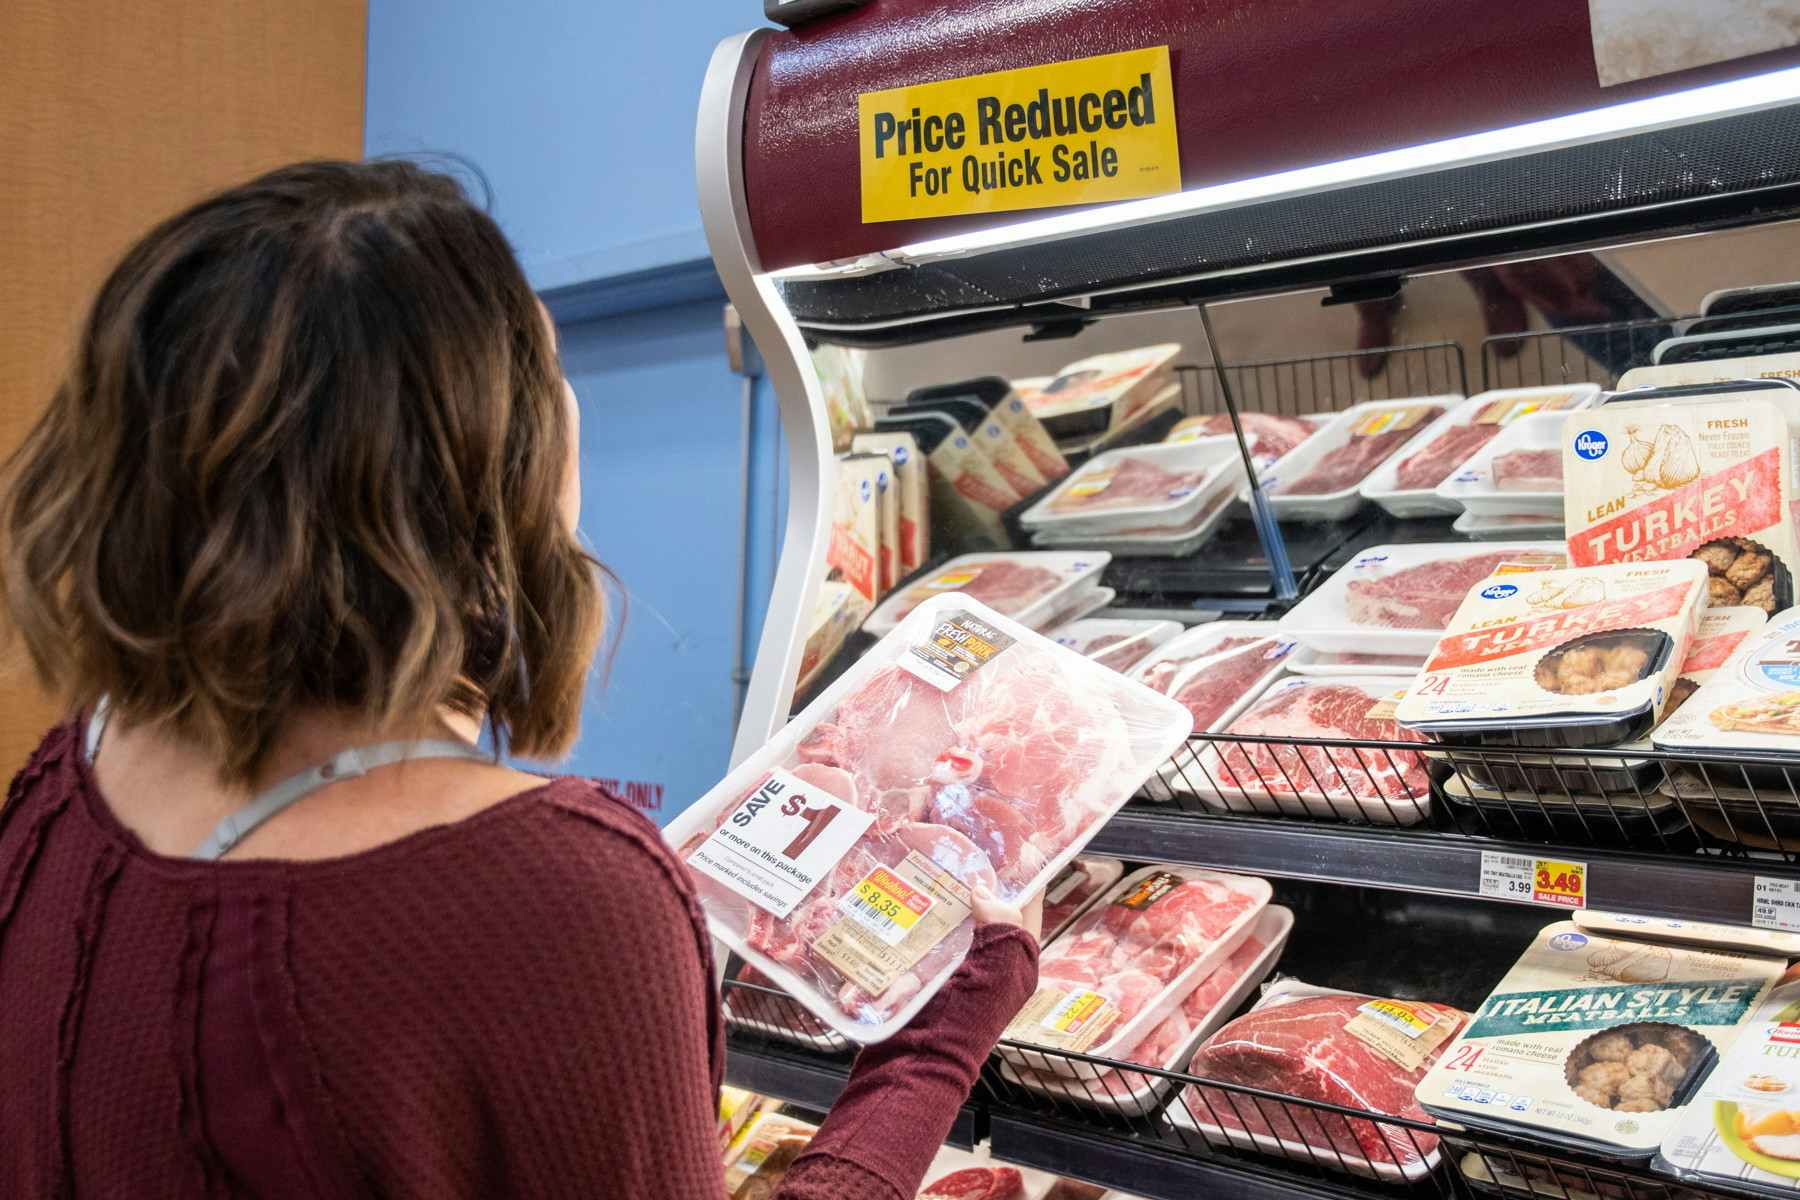 A woman looking at meat in the price reduced section.